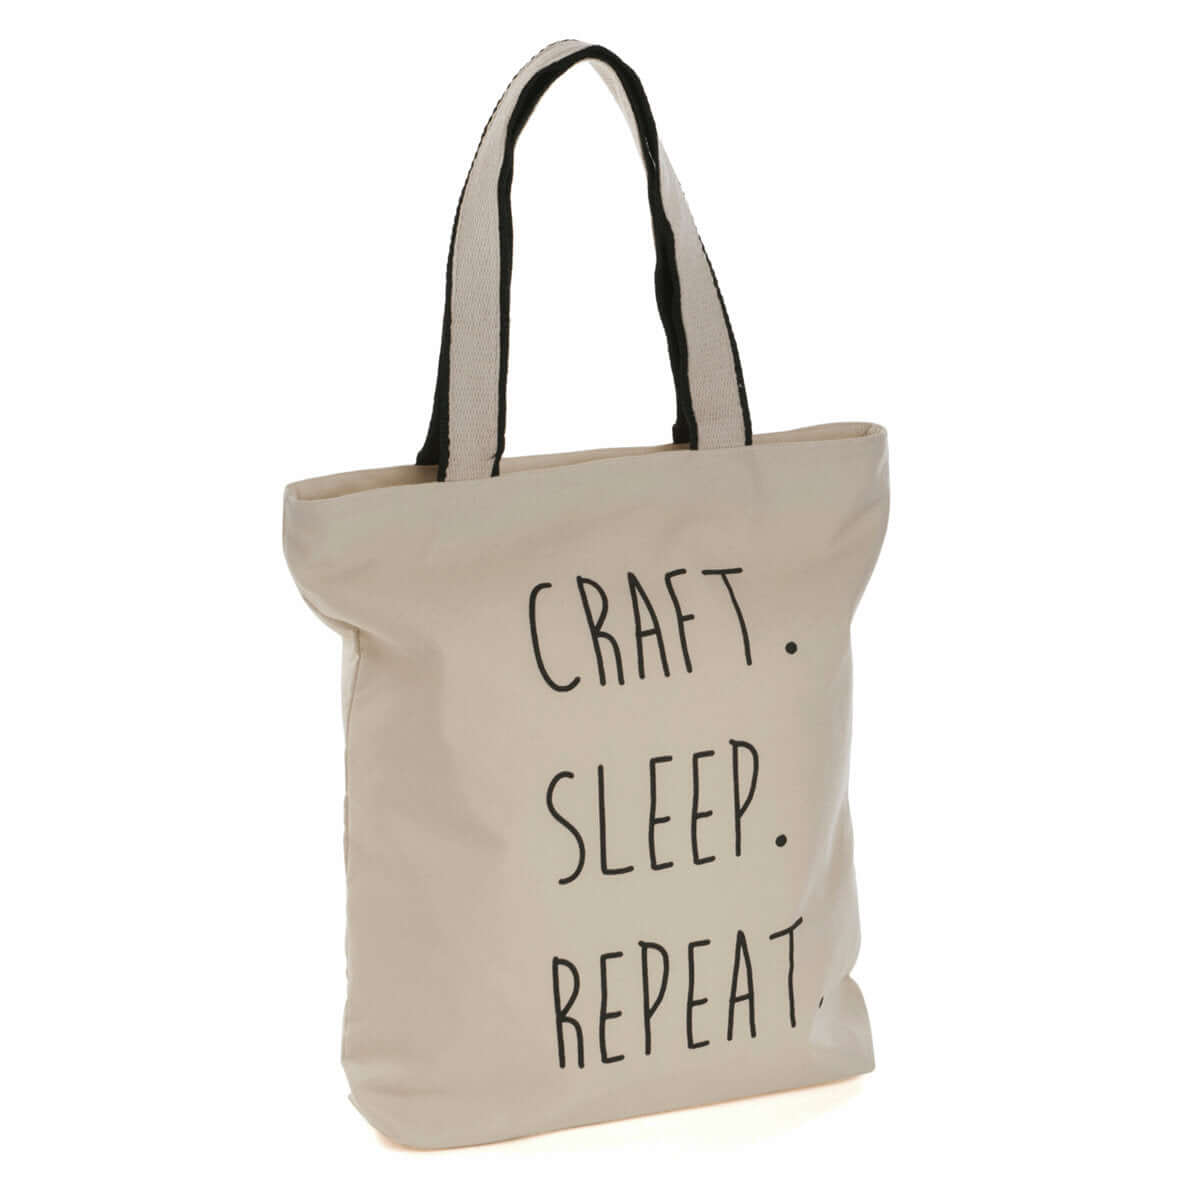 Natural Linen and Hessian Tote Bag: "craft sleep repeat". Sewing organisation, shopping bag or sewing gift.